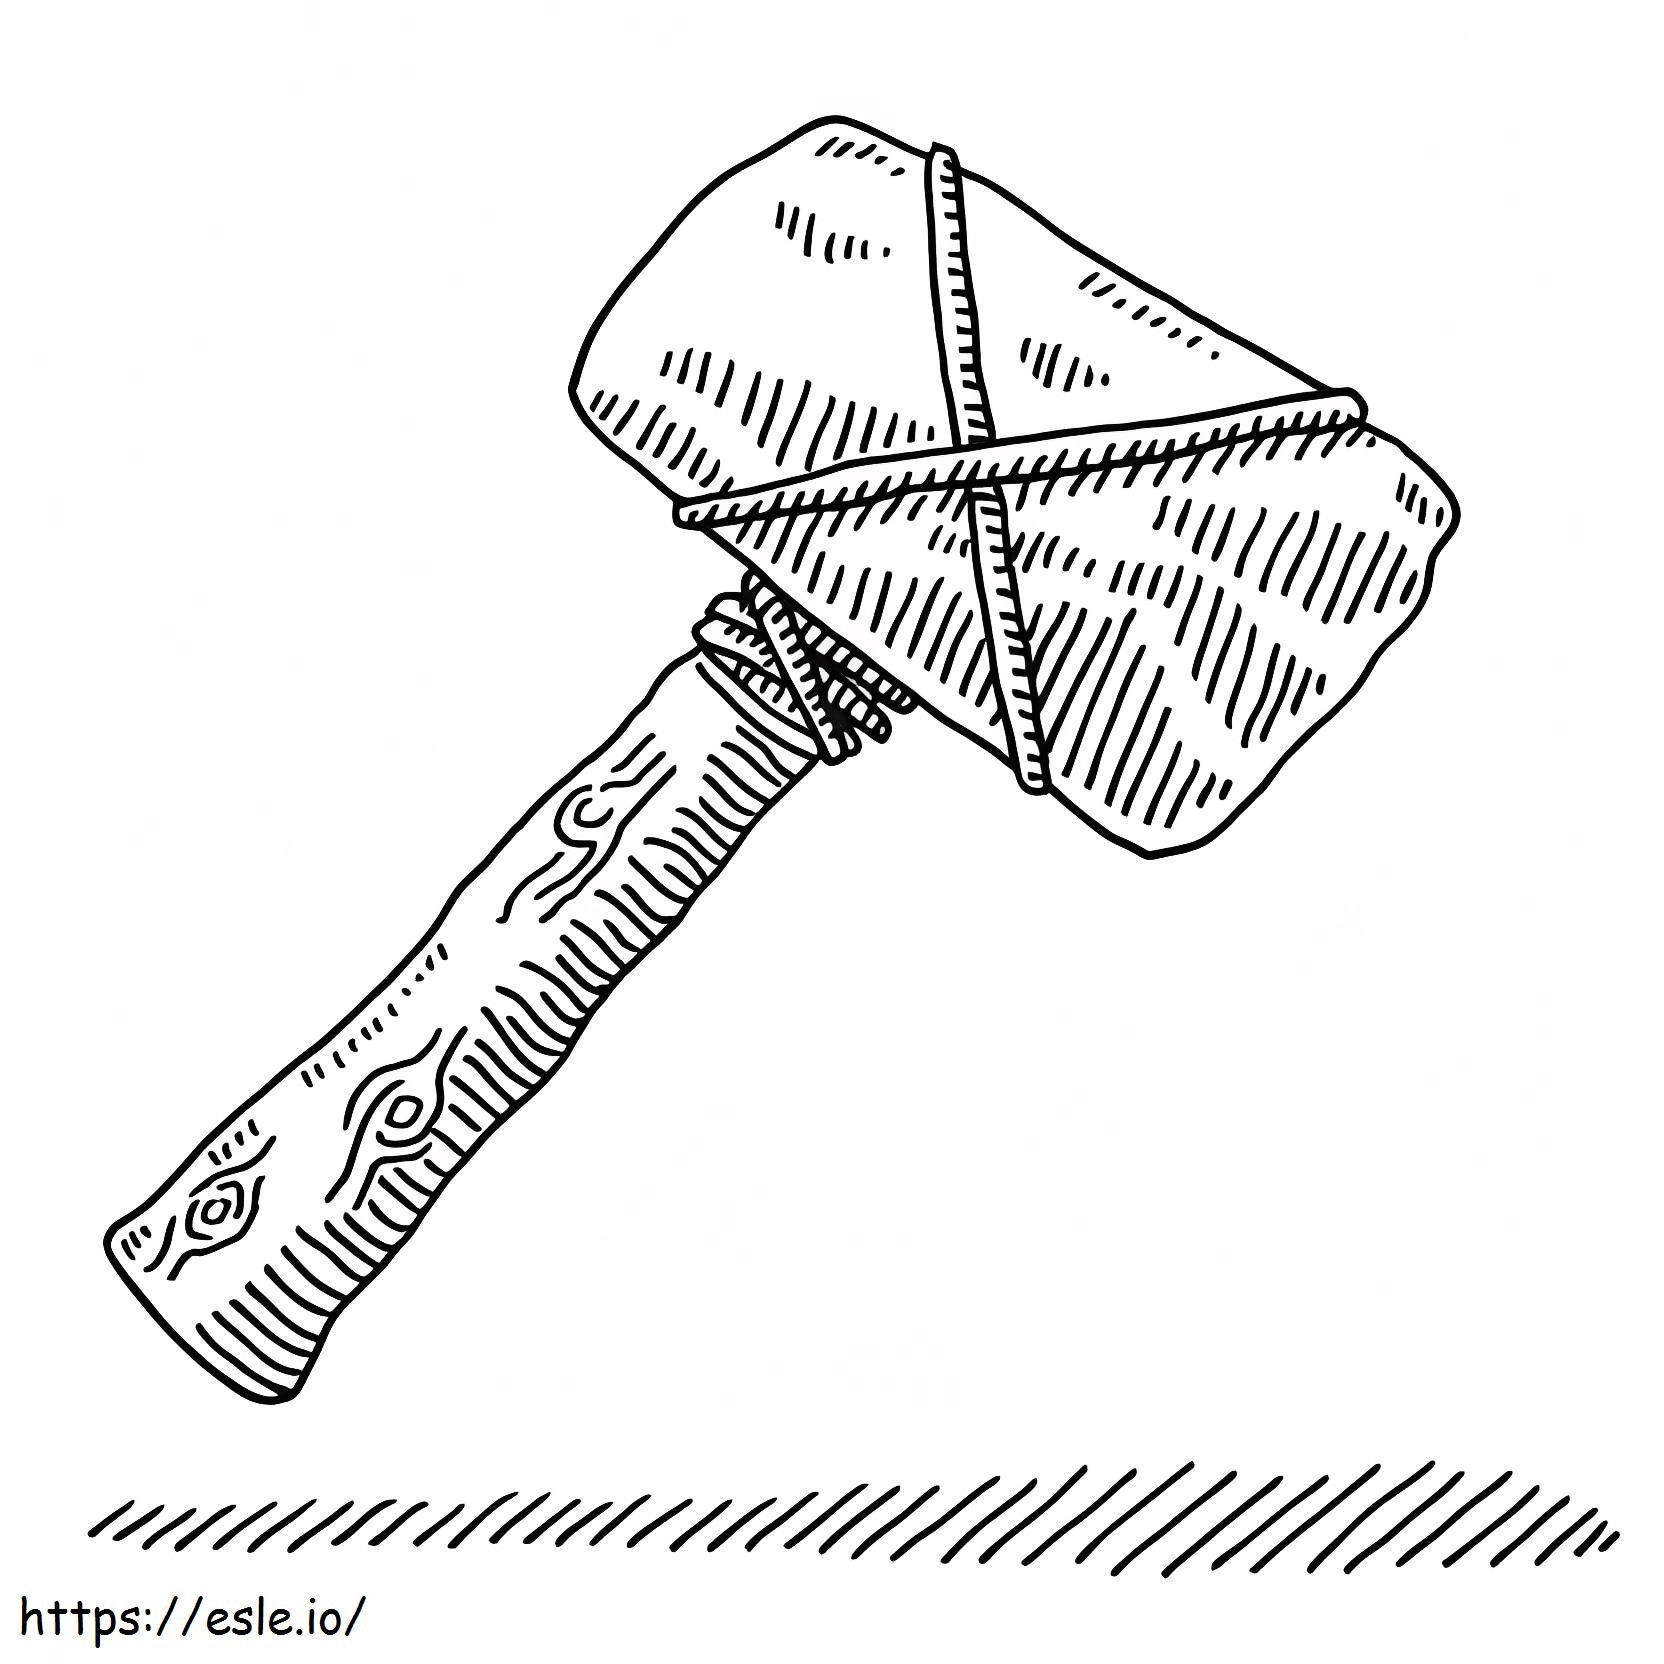 Stone Age Tool Hammer coloring page